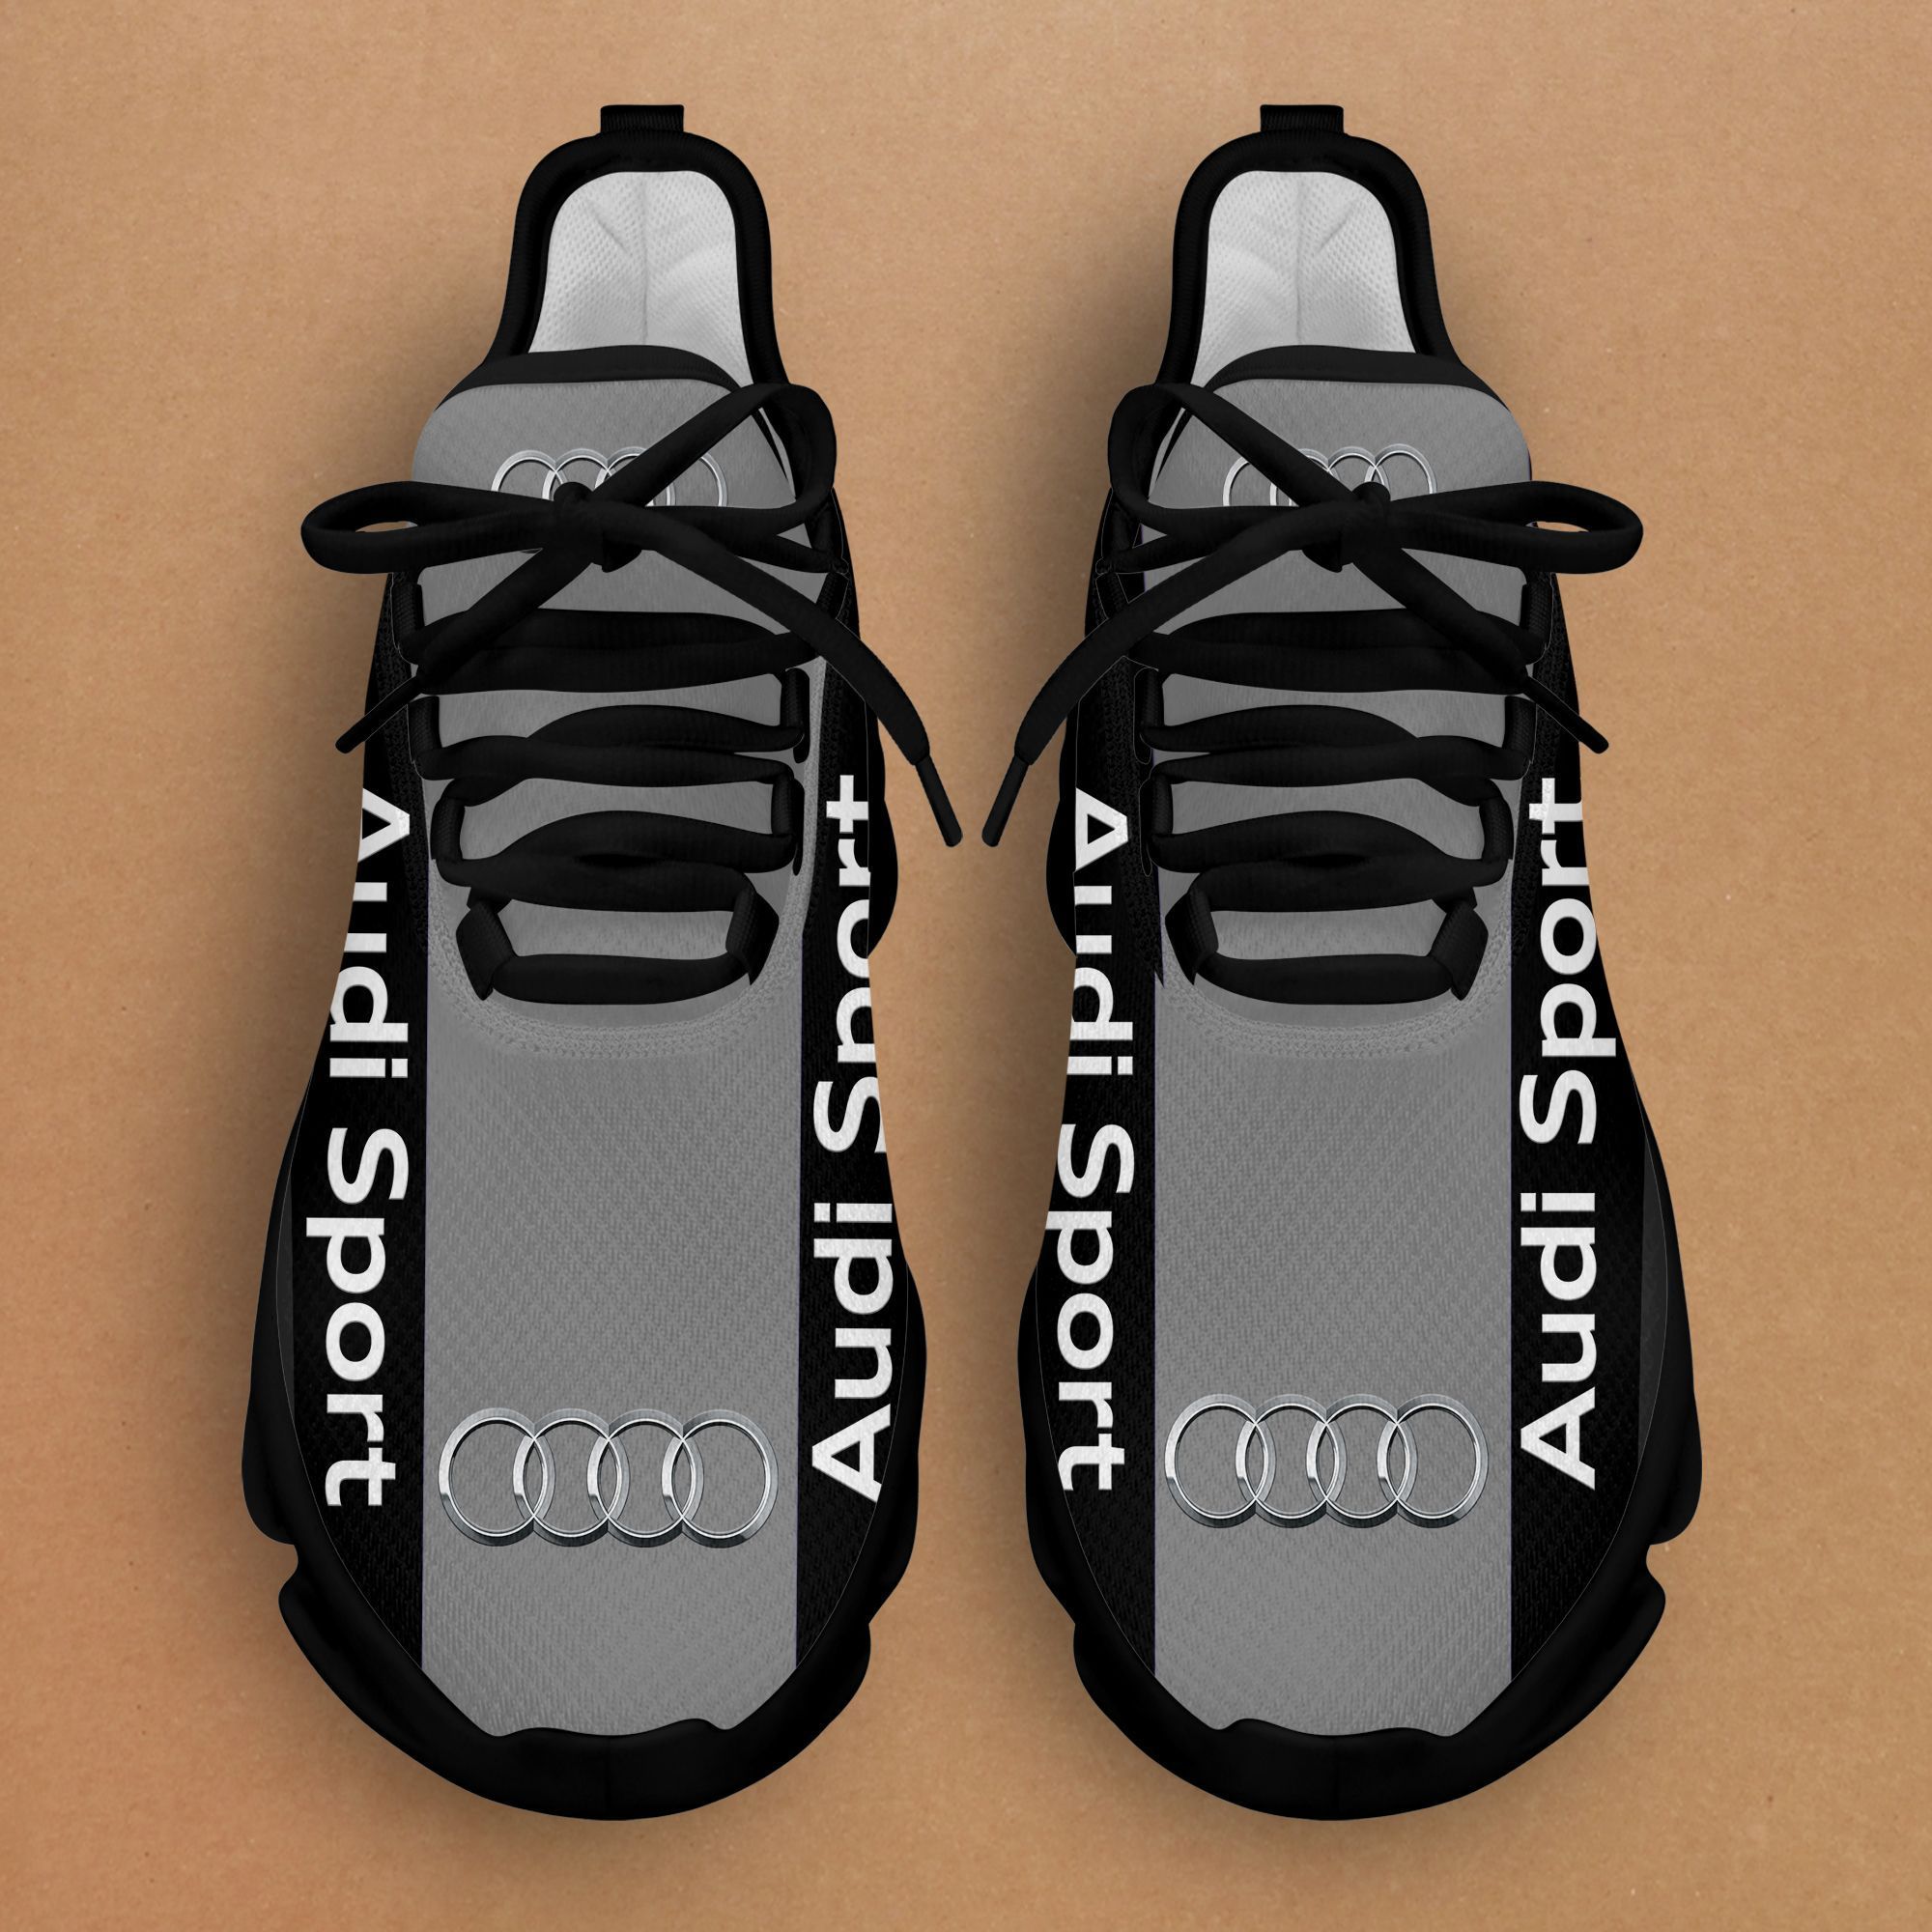 Audi Sport clunky max soul shoes - LIMITED EDITION